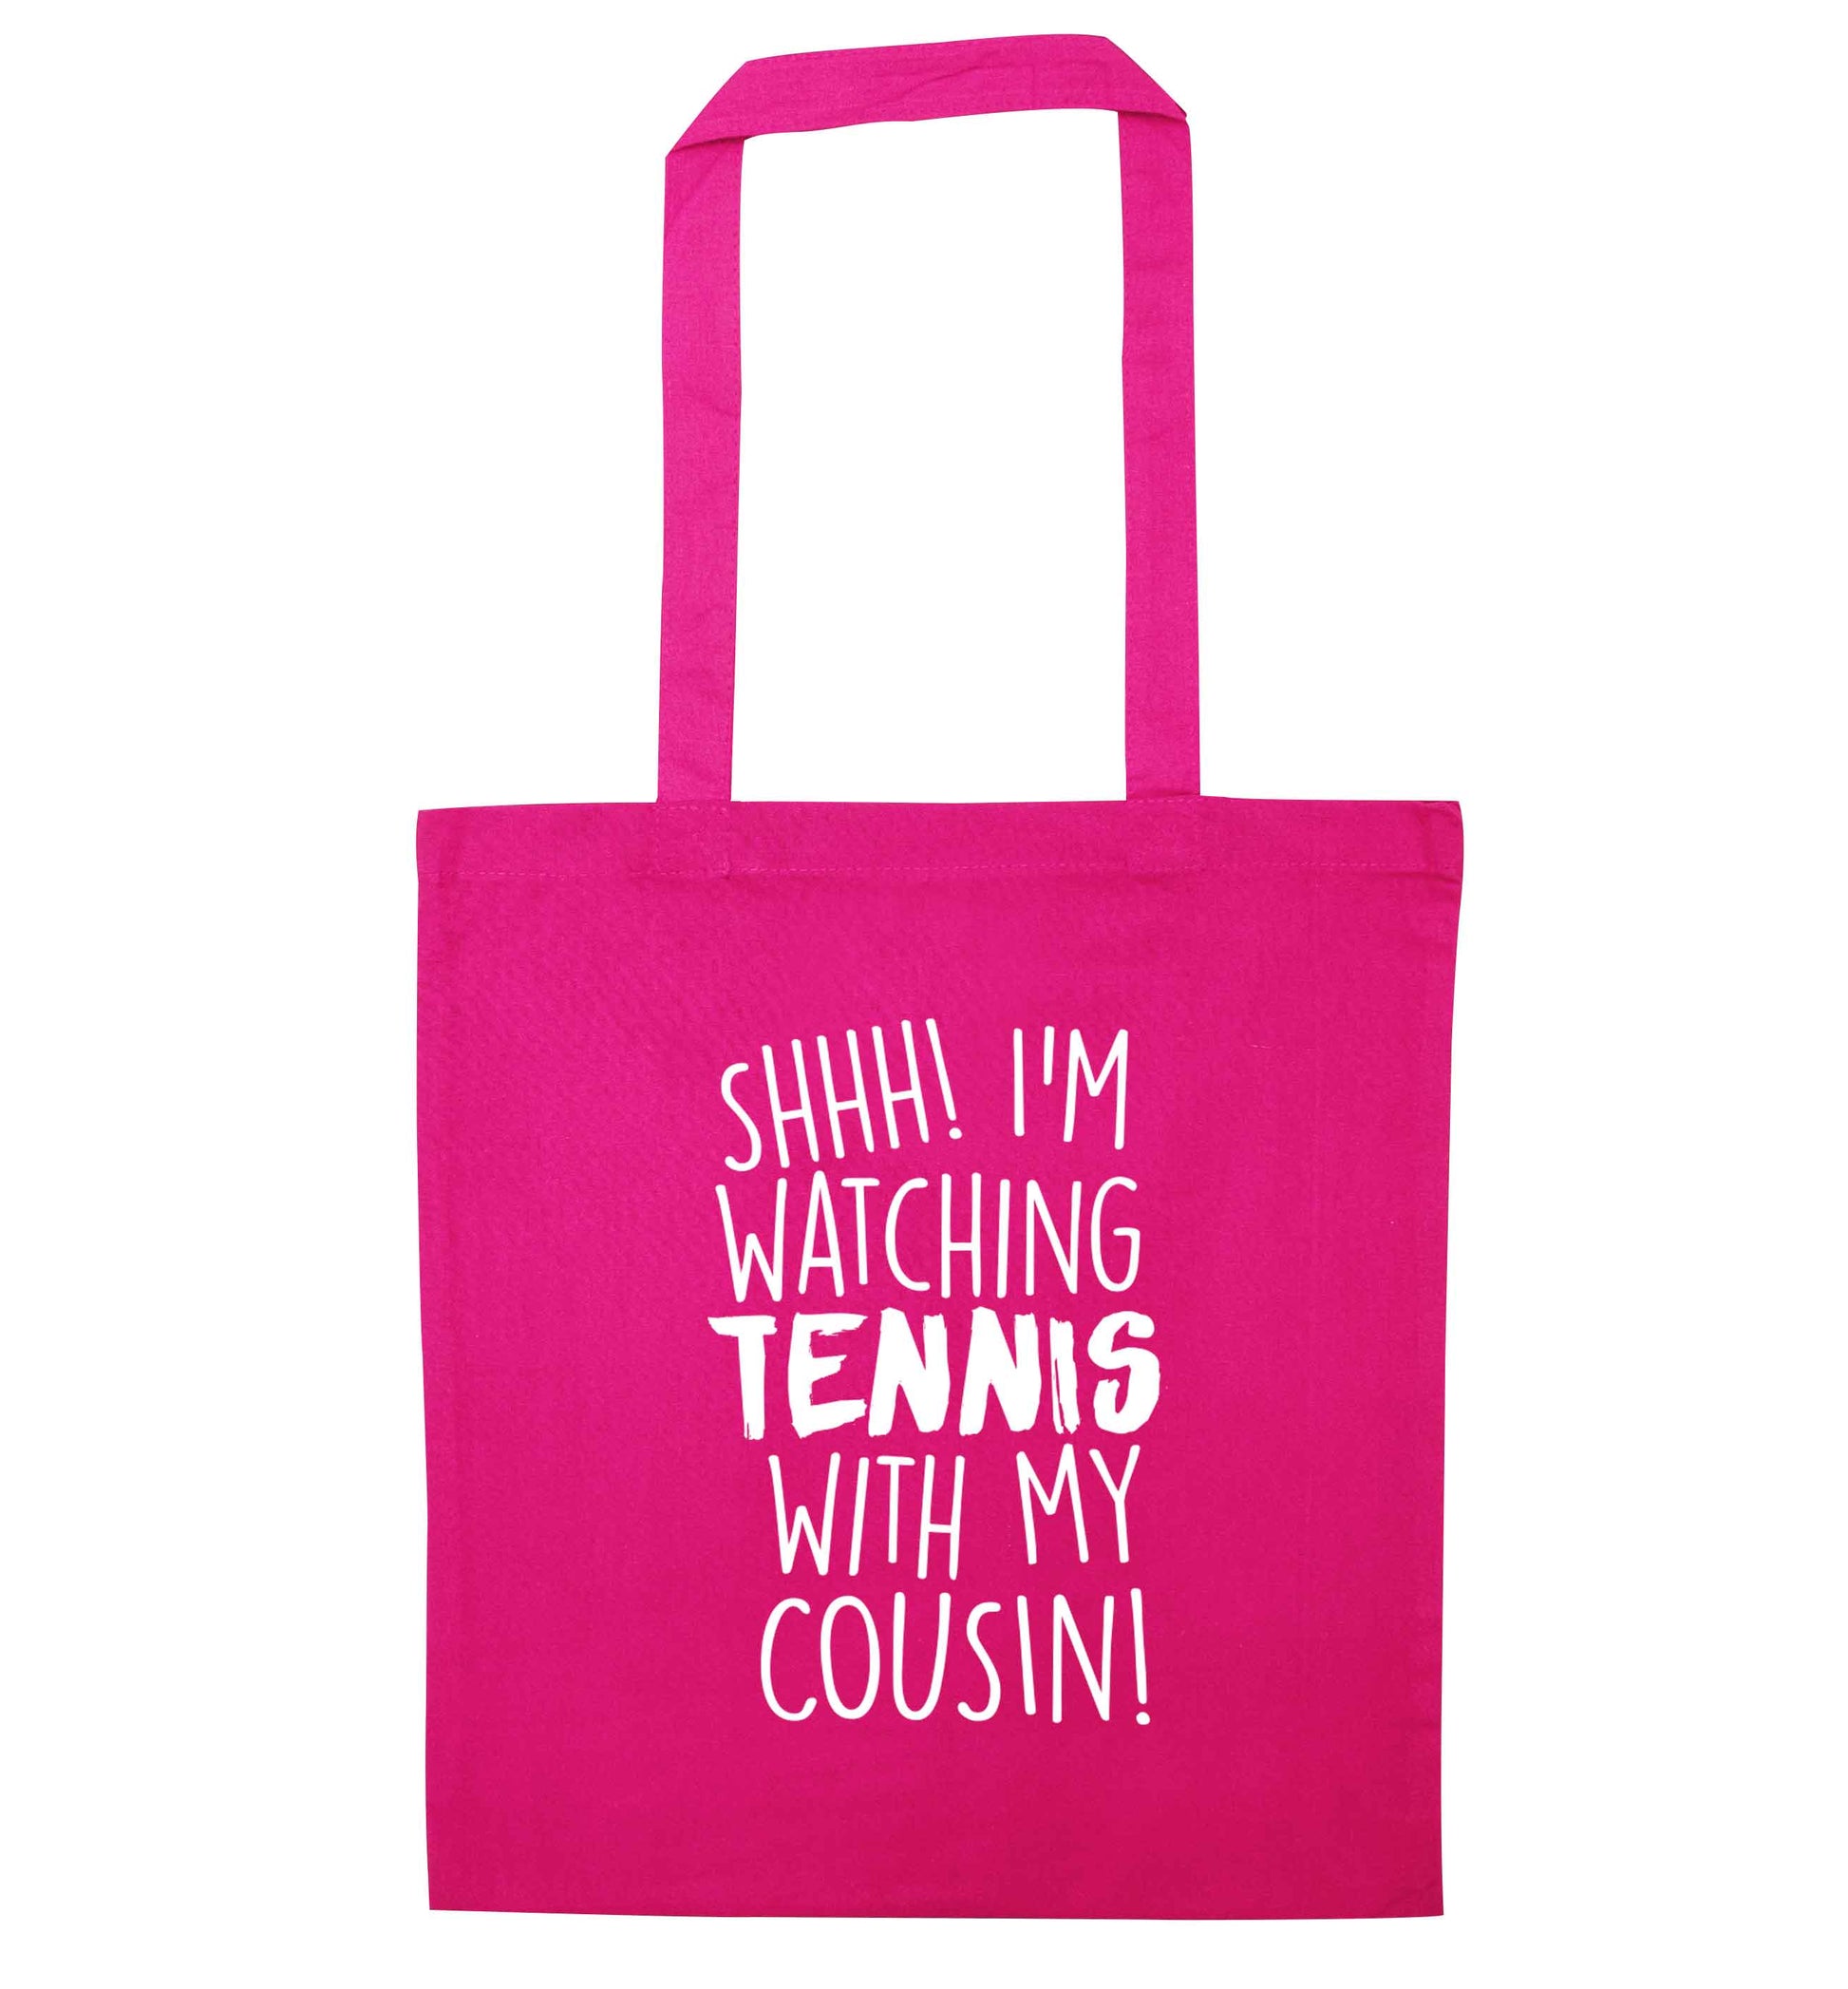 Shh! I'm watching tennis with my cousin! pink tote bag